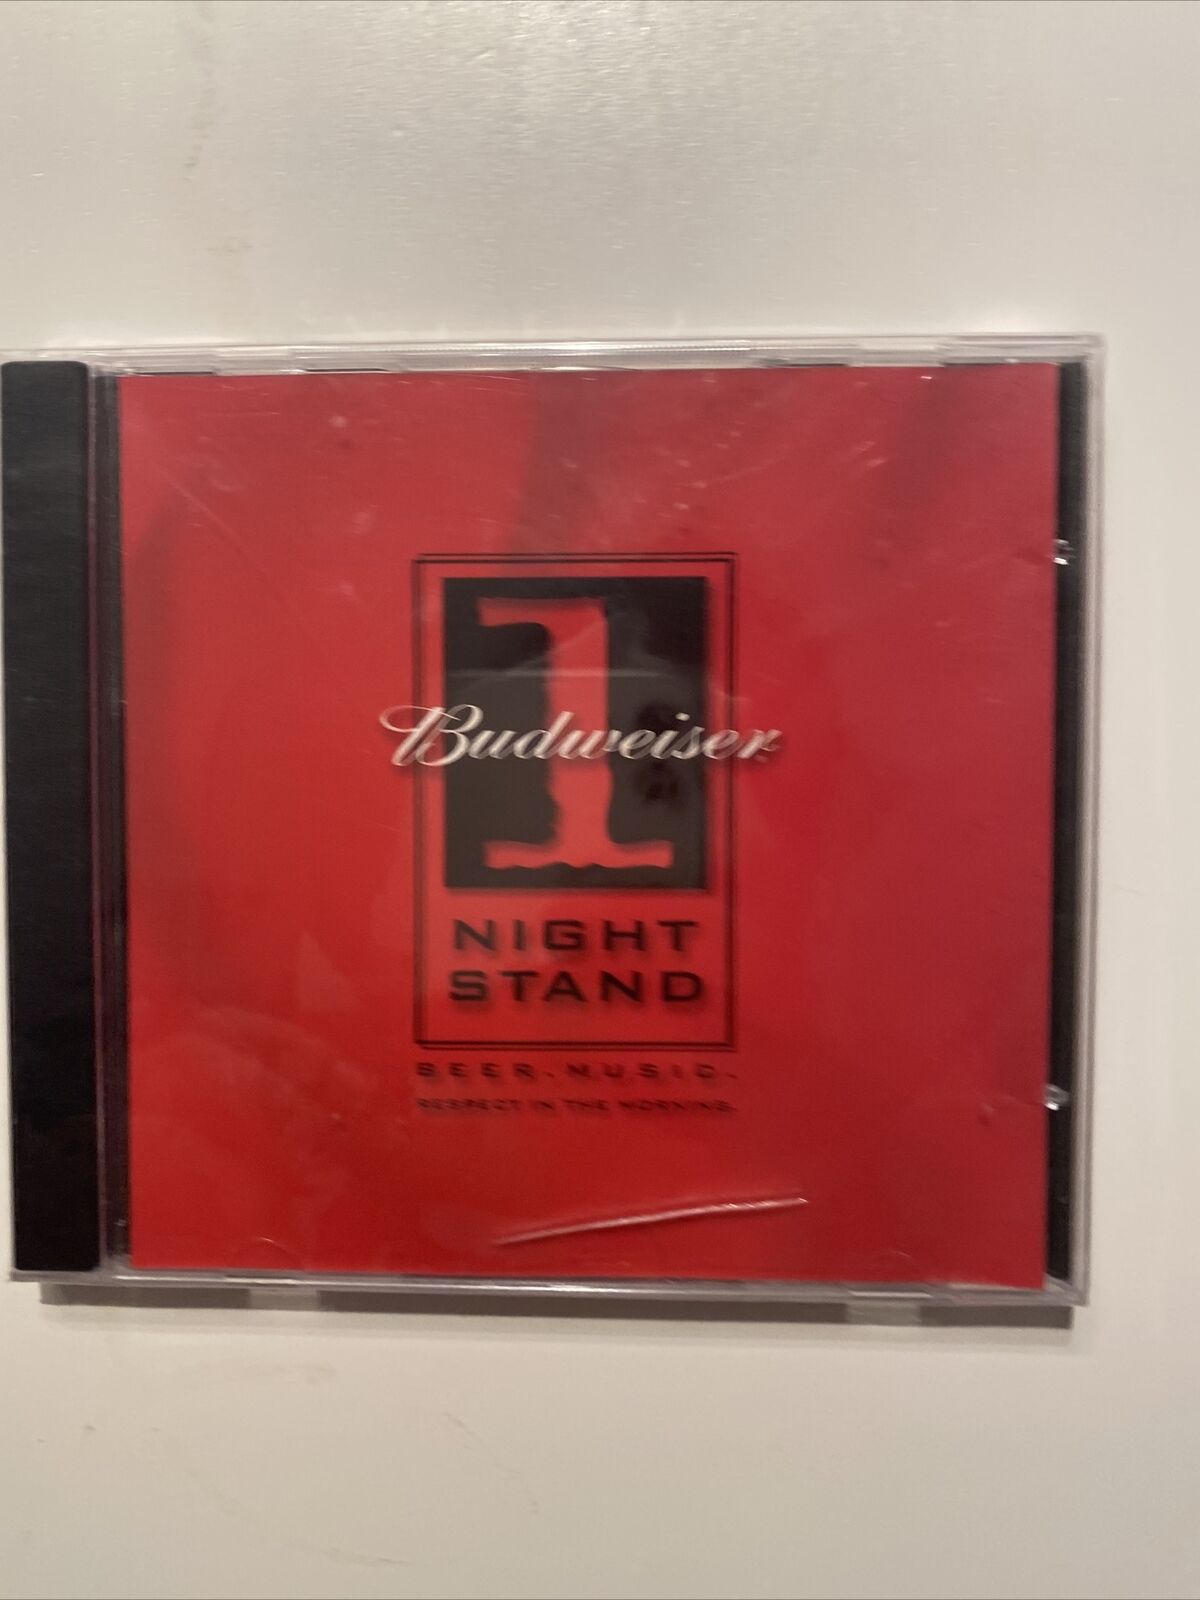 Budweiser 1 One Night Stand Beer Music Respect In The Morning CD